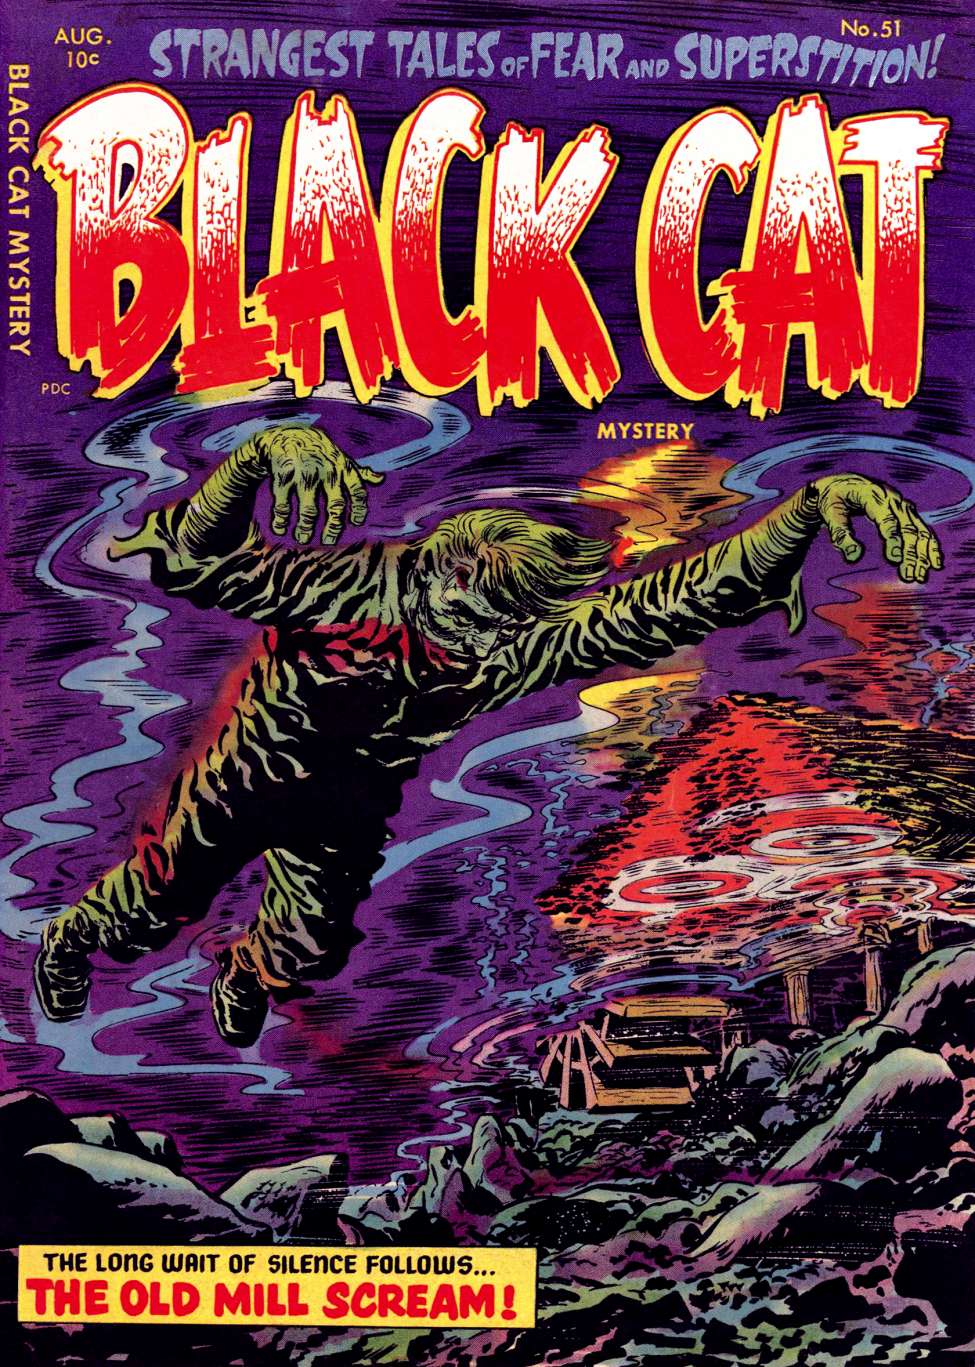 Comic Book Cover For Black Cat 51 (Mystery)